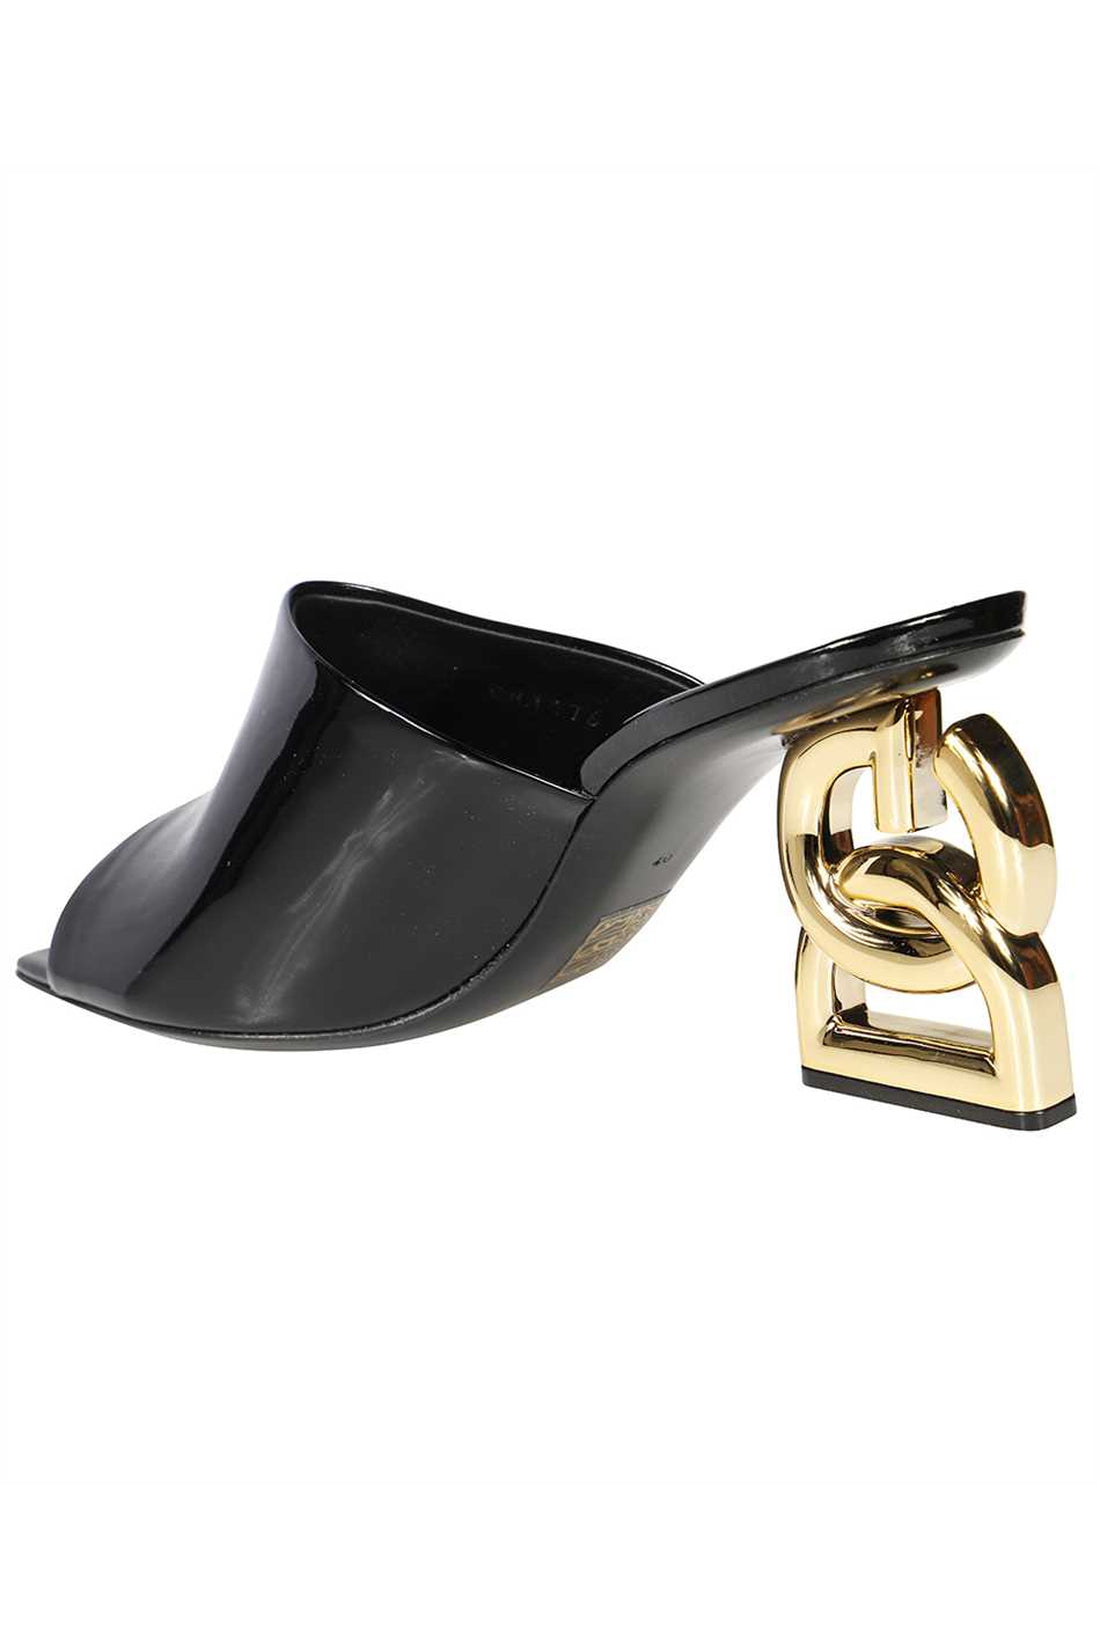 Dolce & Gabbana-OUTLET-SALE-Keira patent leather mules-ARCHIVIST